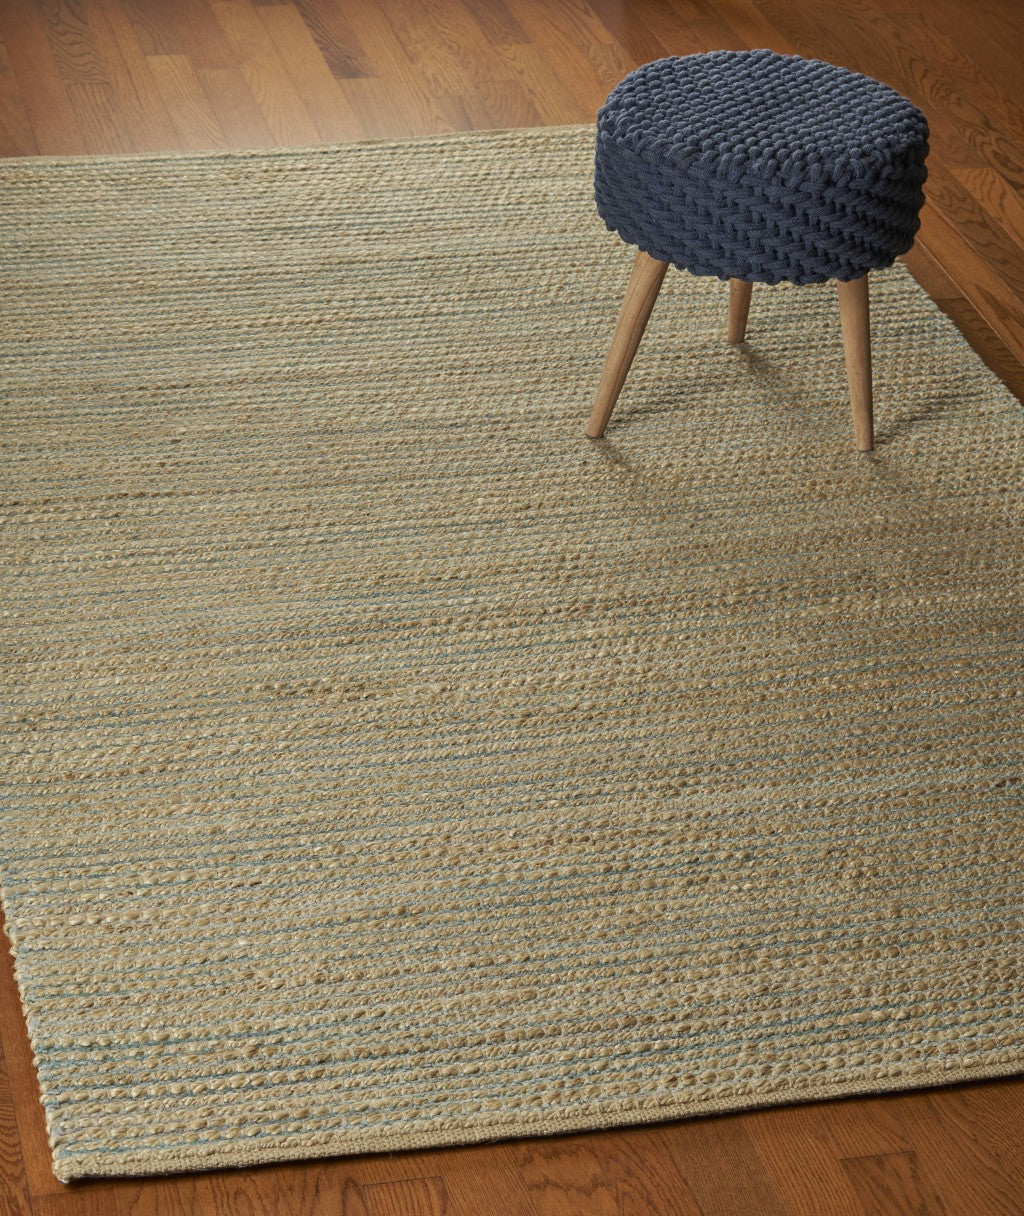 5’ x 8’ Tan and Blue Undertone Striated Area Rug